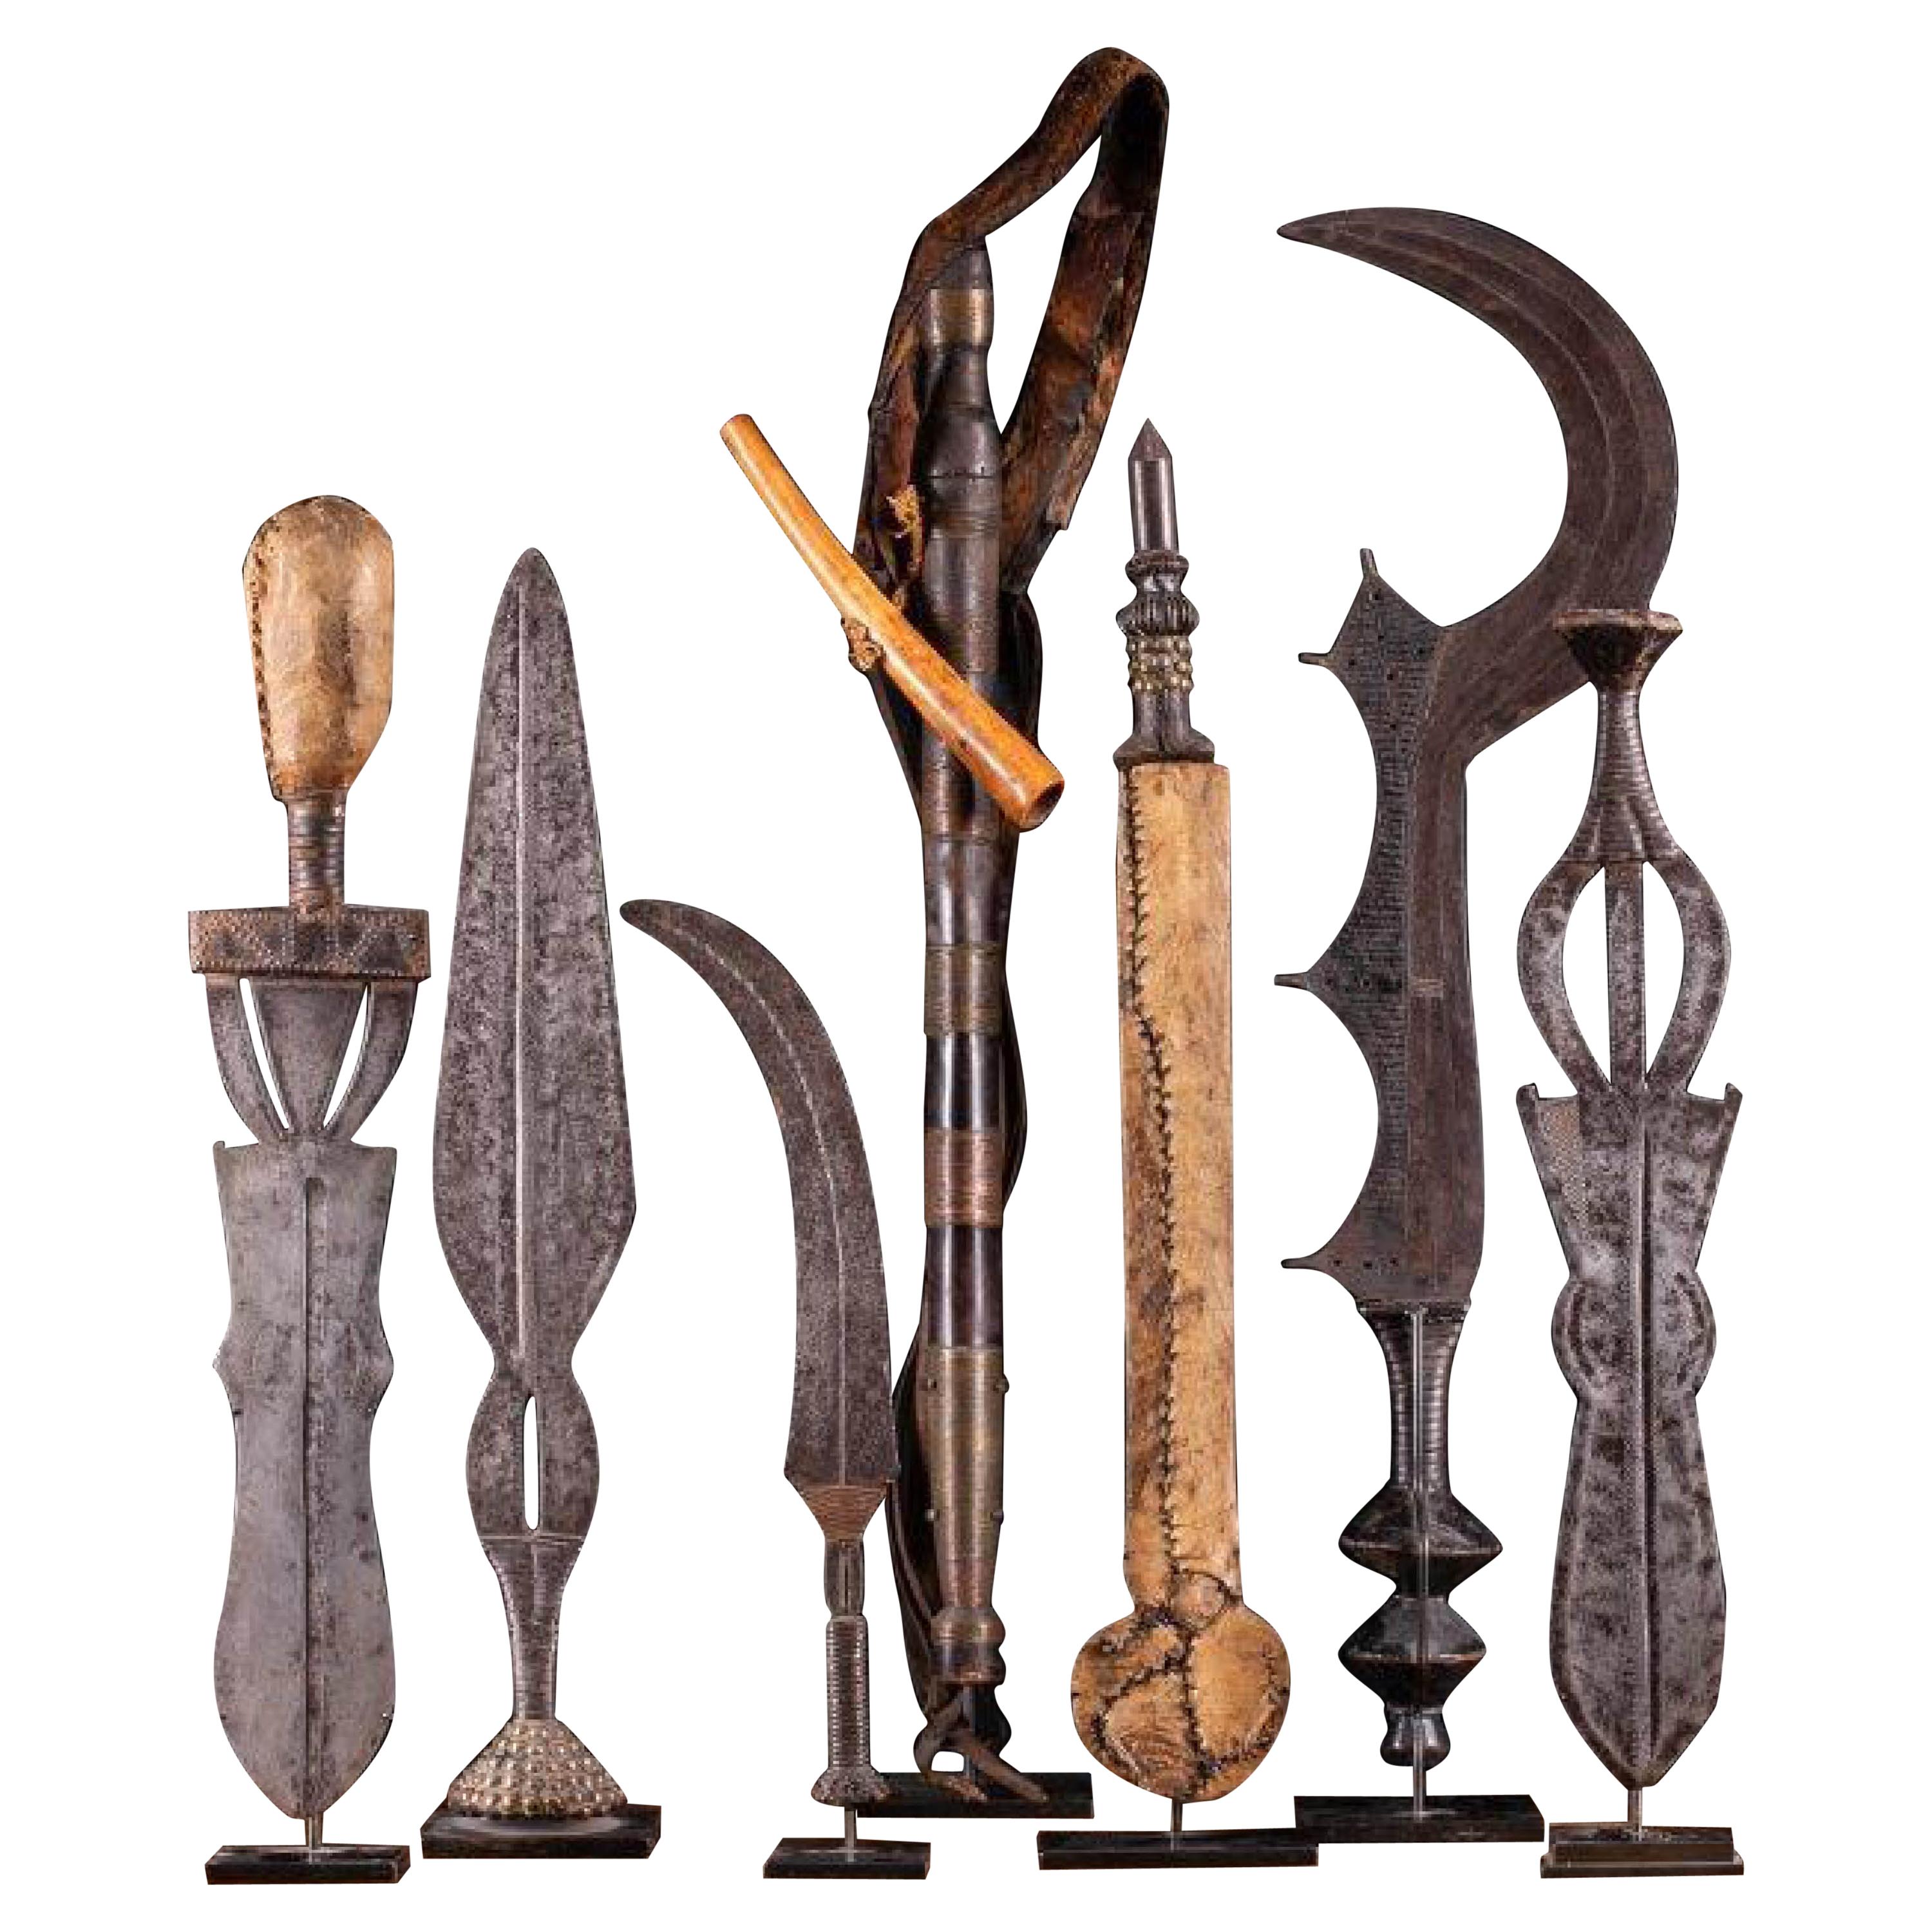 Selection of Authentic Kongo Knives For Sale